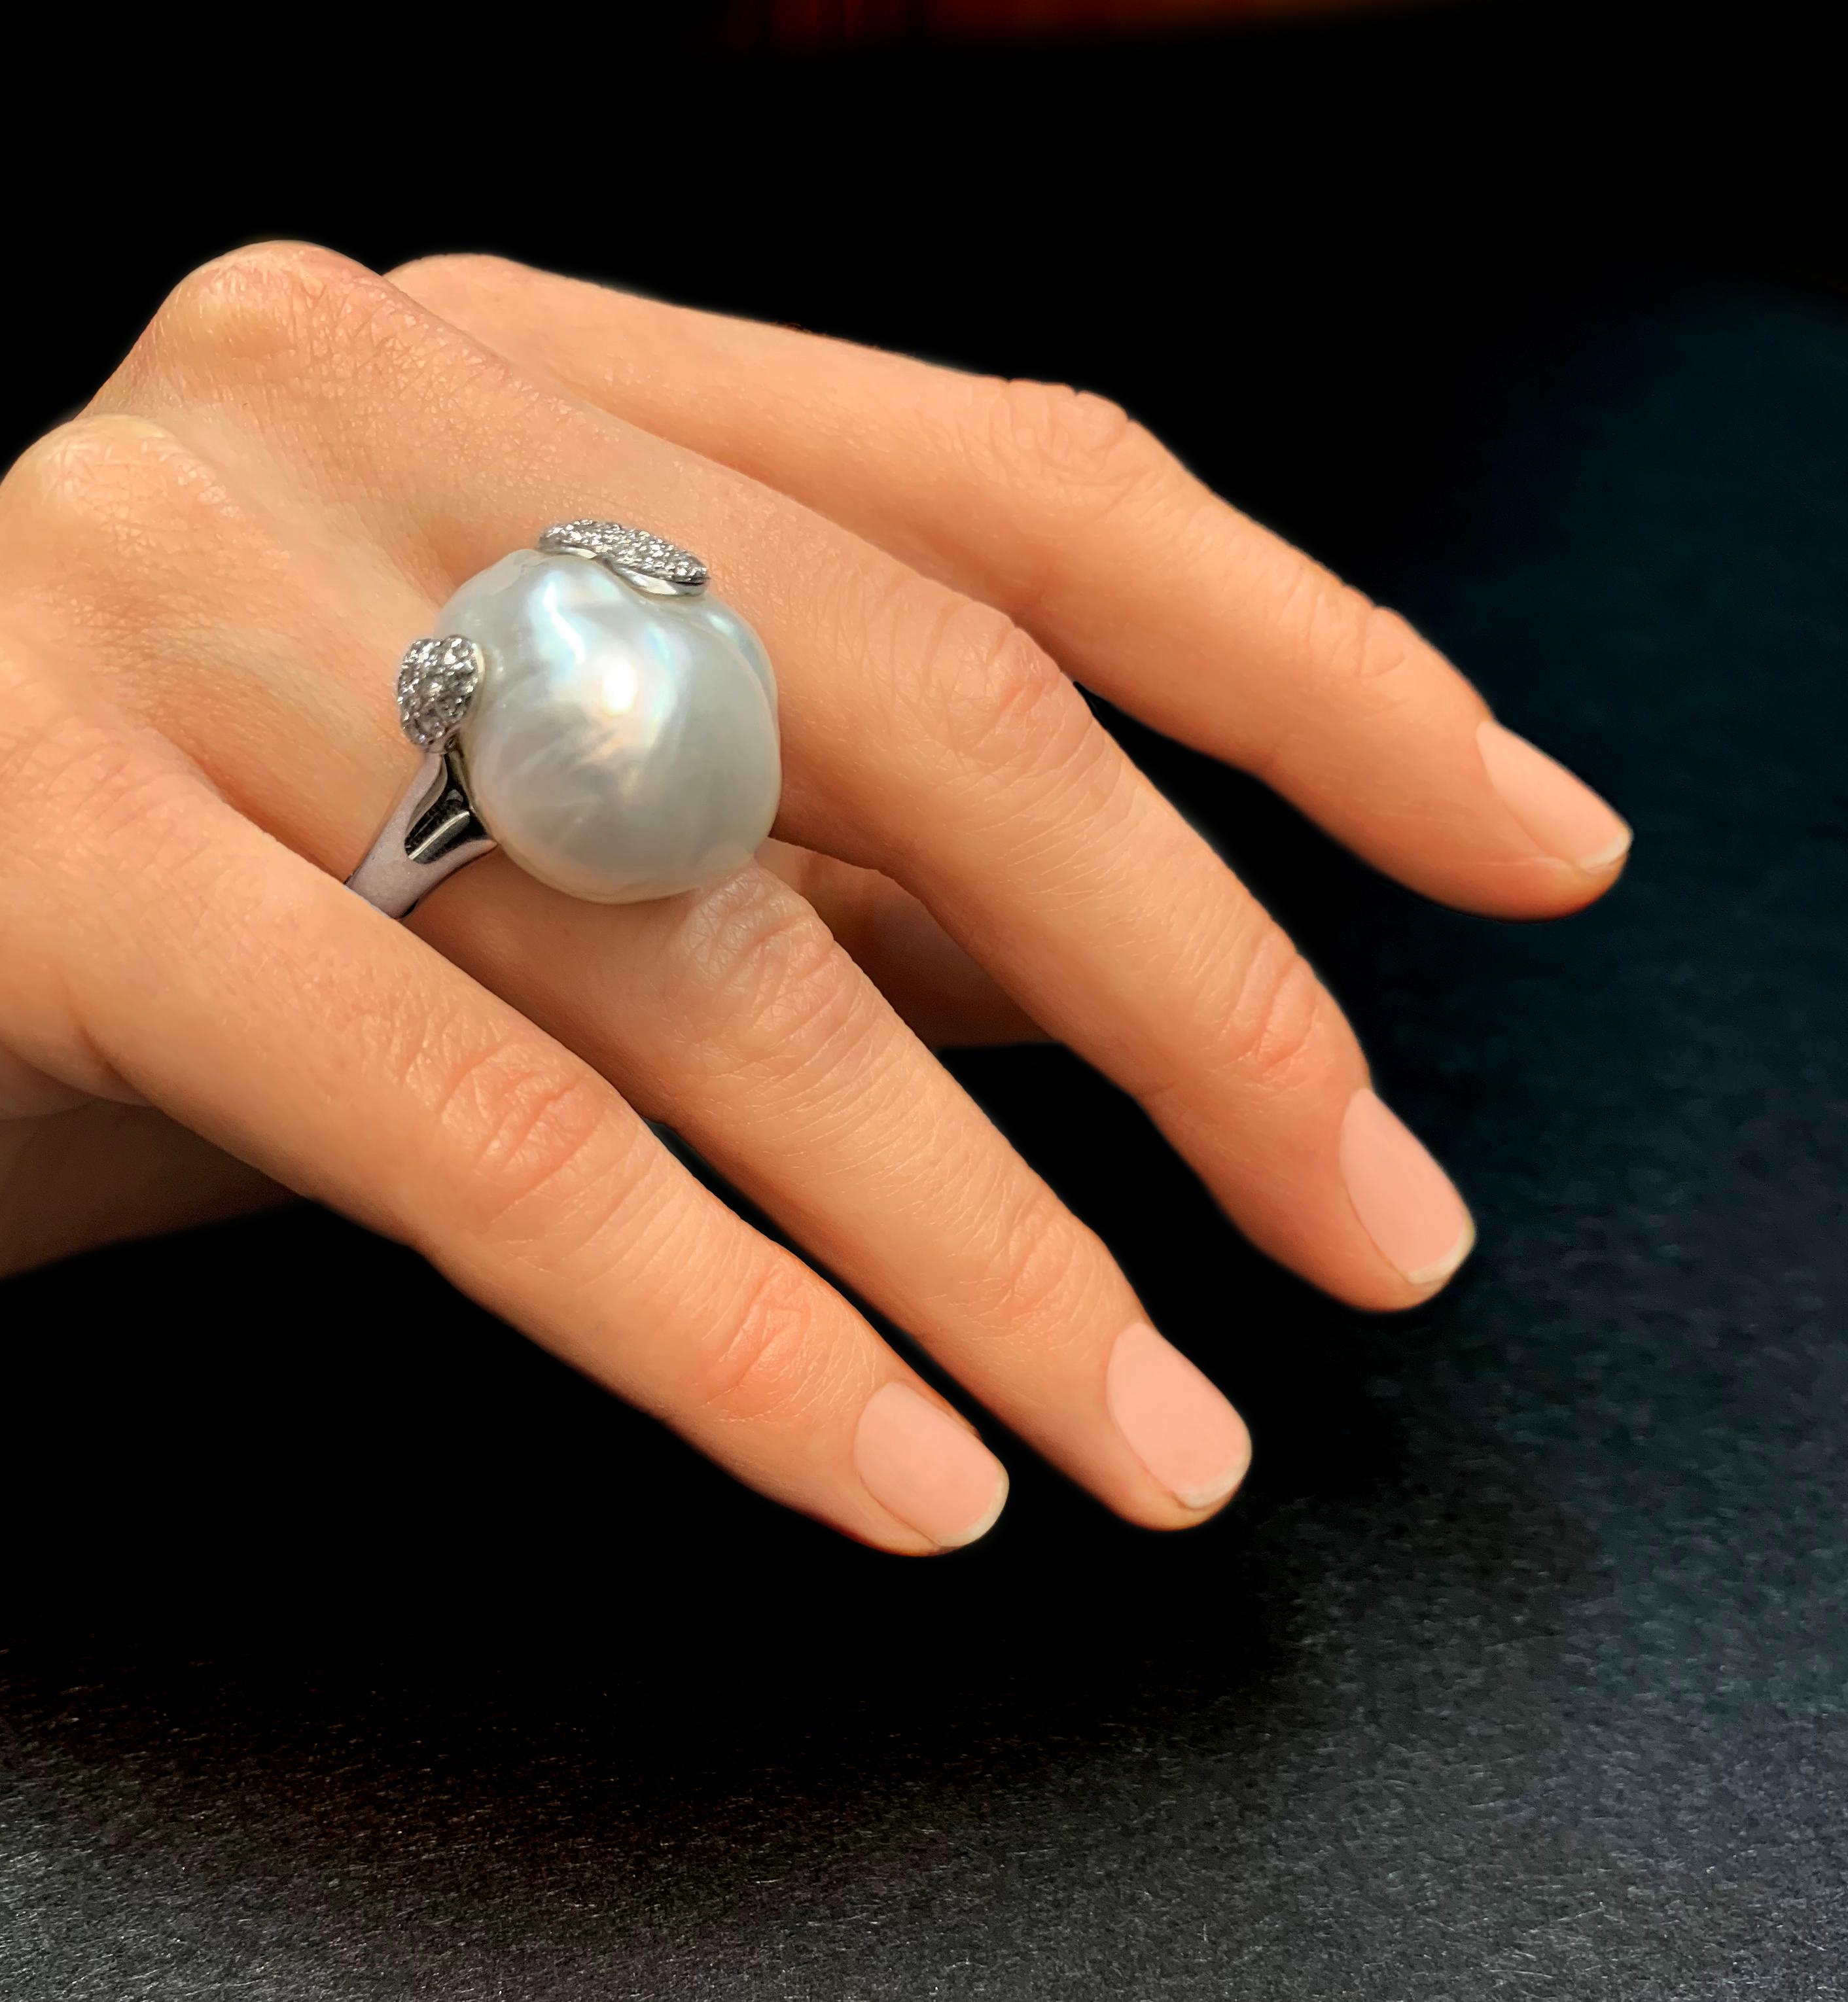 This striking ring by Yoko London features a radiant baroque pearl set amongst a contemporary arrangement of diamonds. Set in 18 Karat white gold to perfectly accentuate the lustre of the pearl and vivacity of the diamonds, this exceptional ring